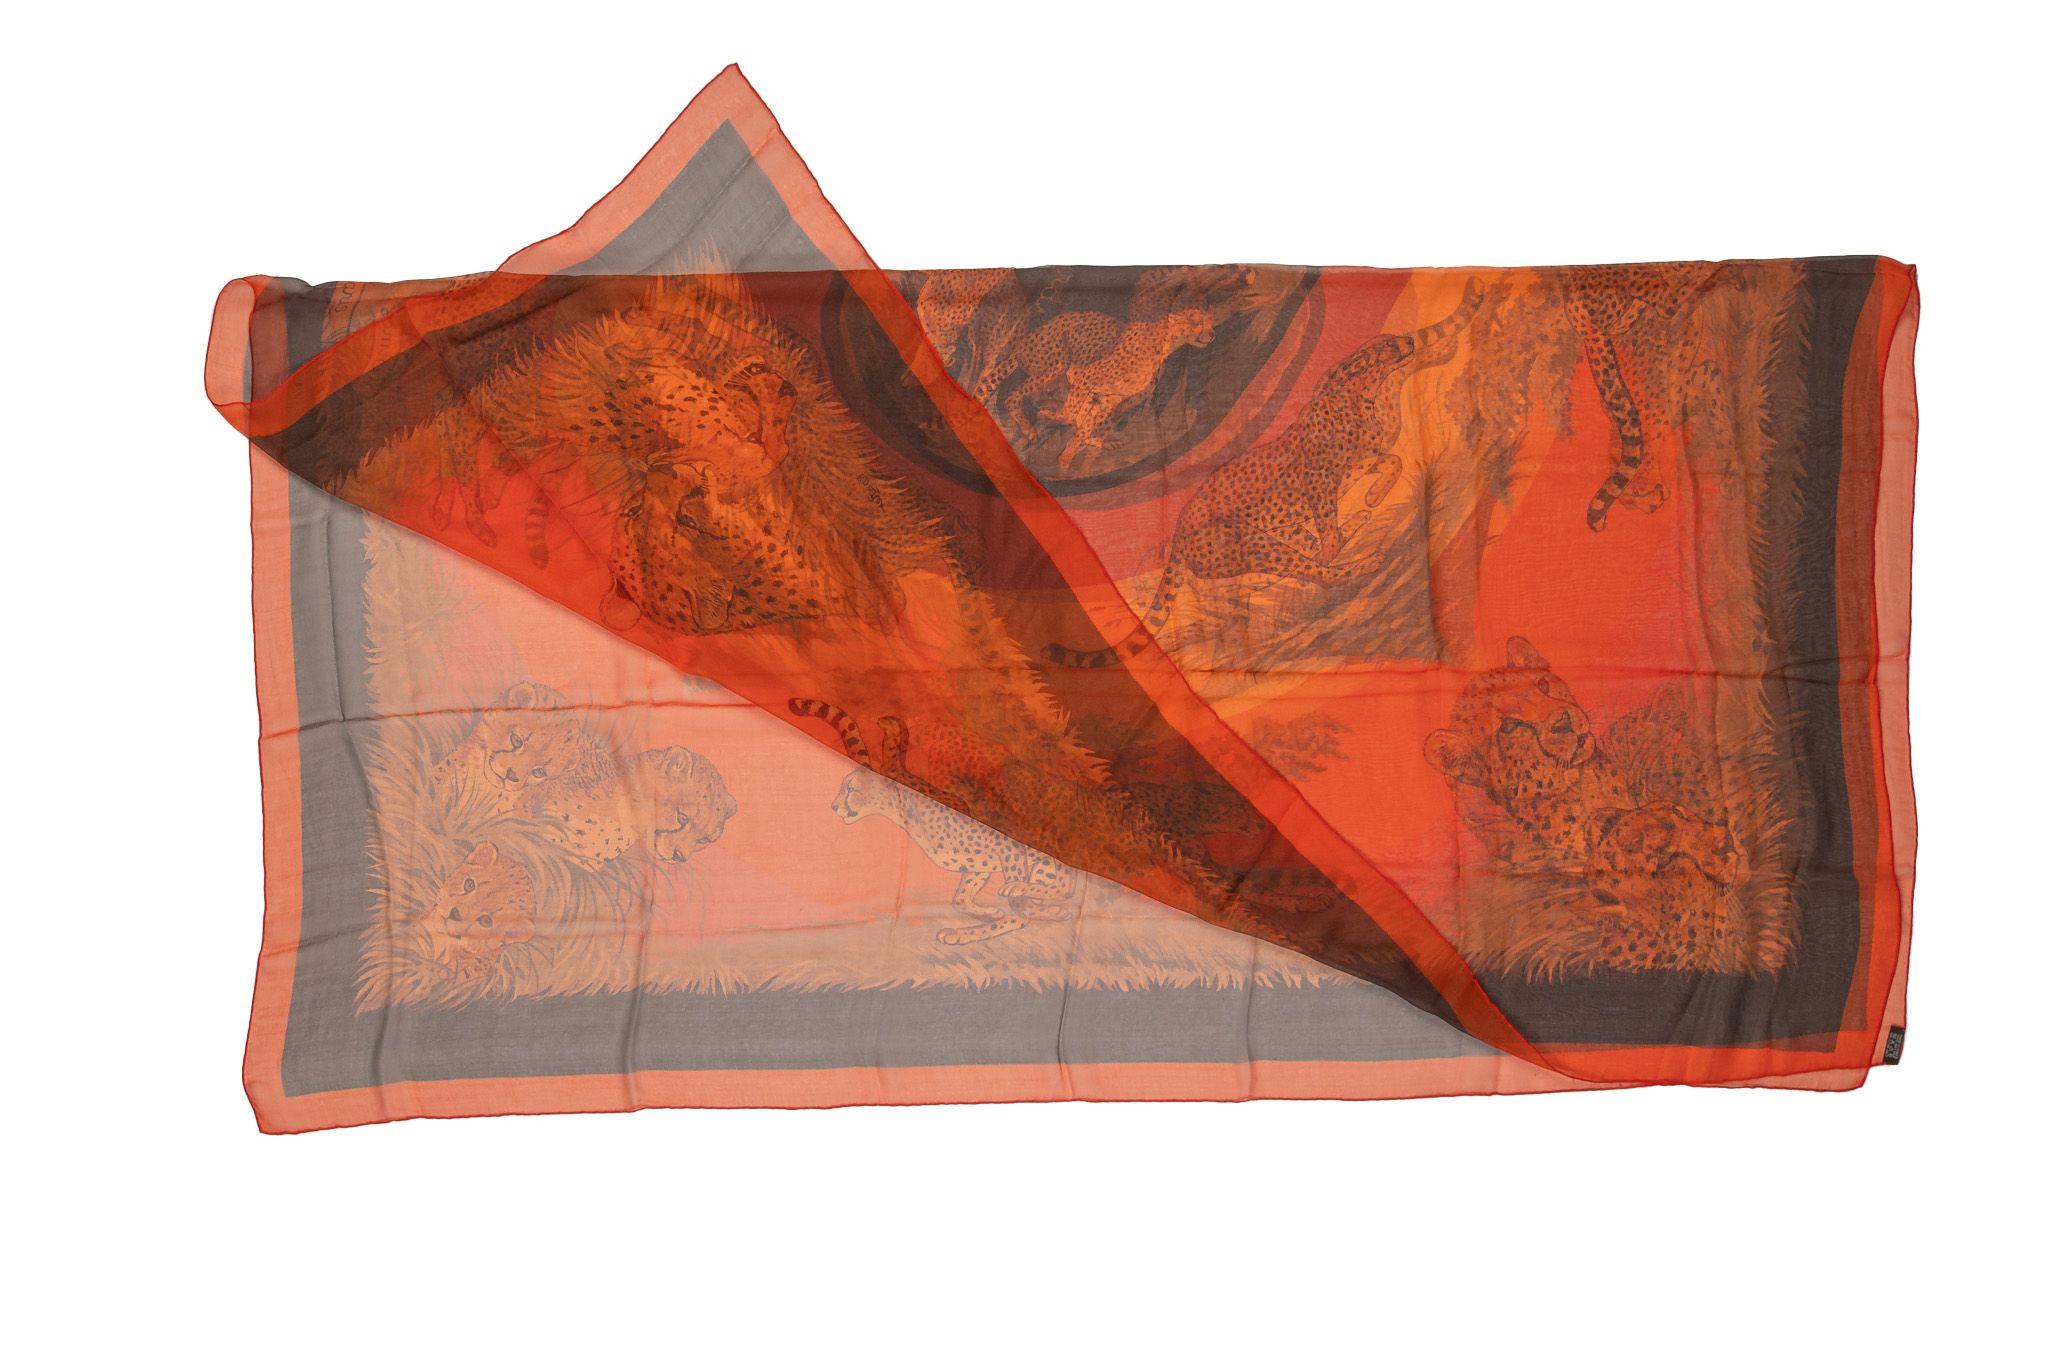 Hermès “Guepards” Silk Chiffon Shawl In Excellent Condition For Sale In West Hollywood, CA